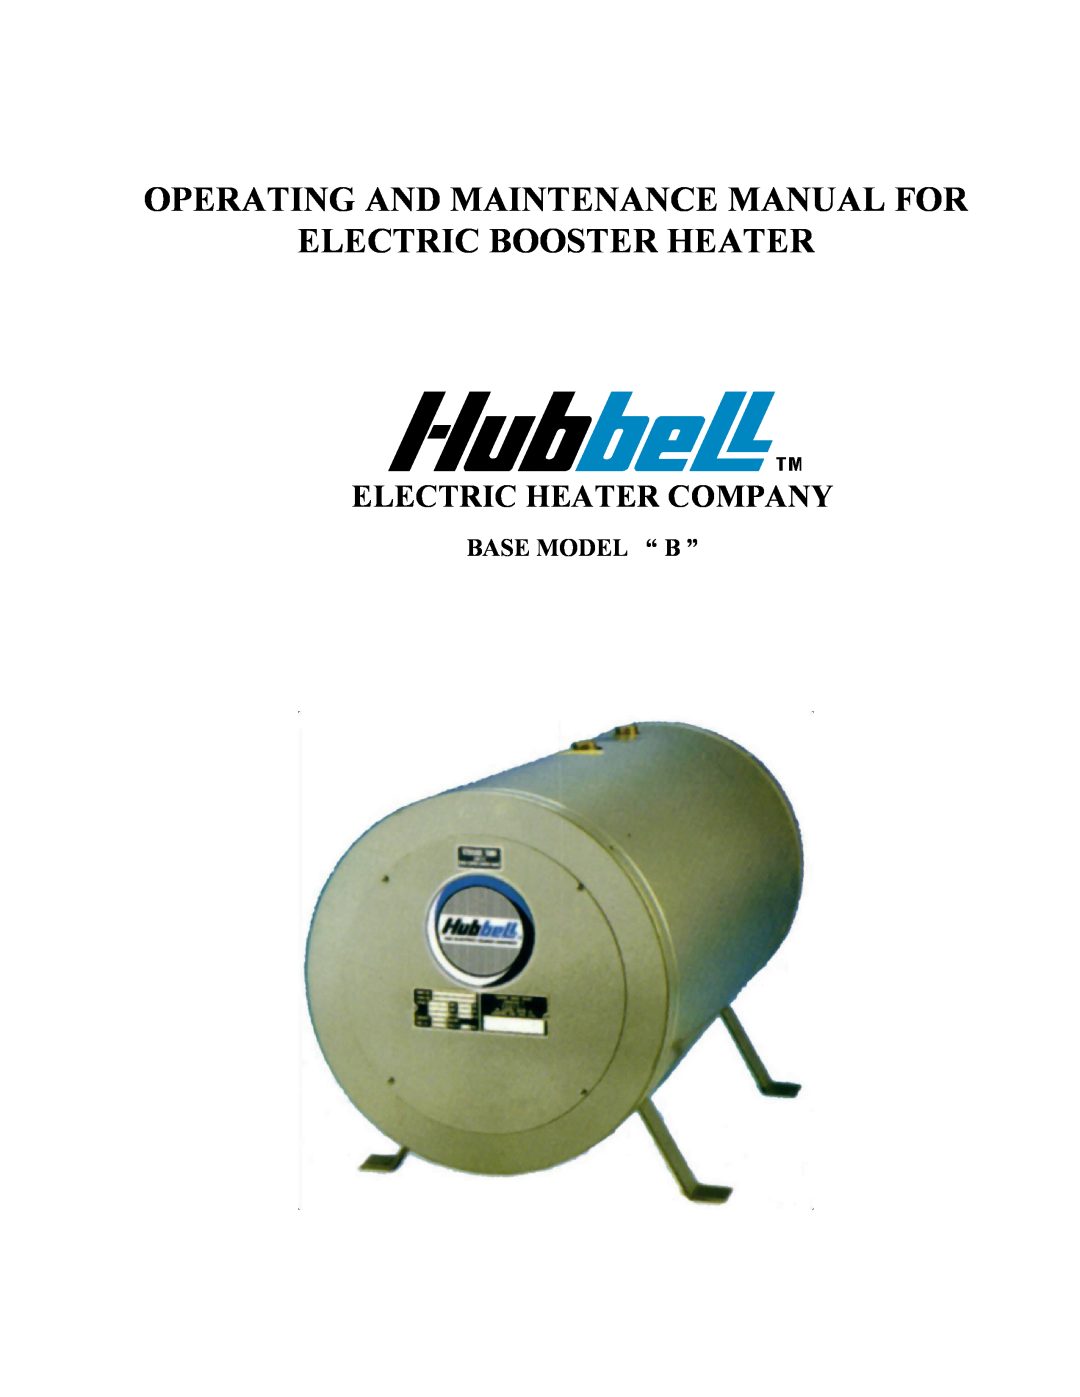 Hubbell Electric Heater Company manual Base Model “ B ”, Operating And Maintenance Manual For, Electric Booster Heater 